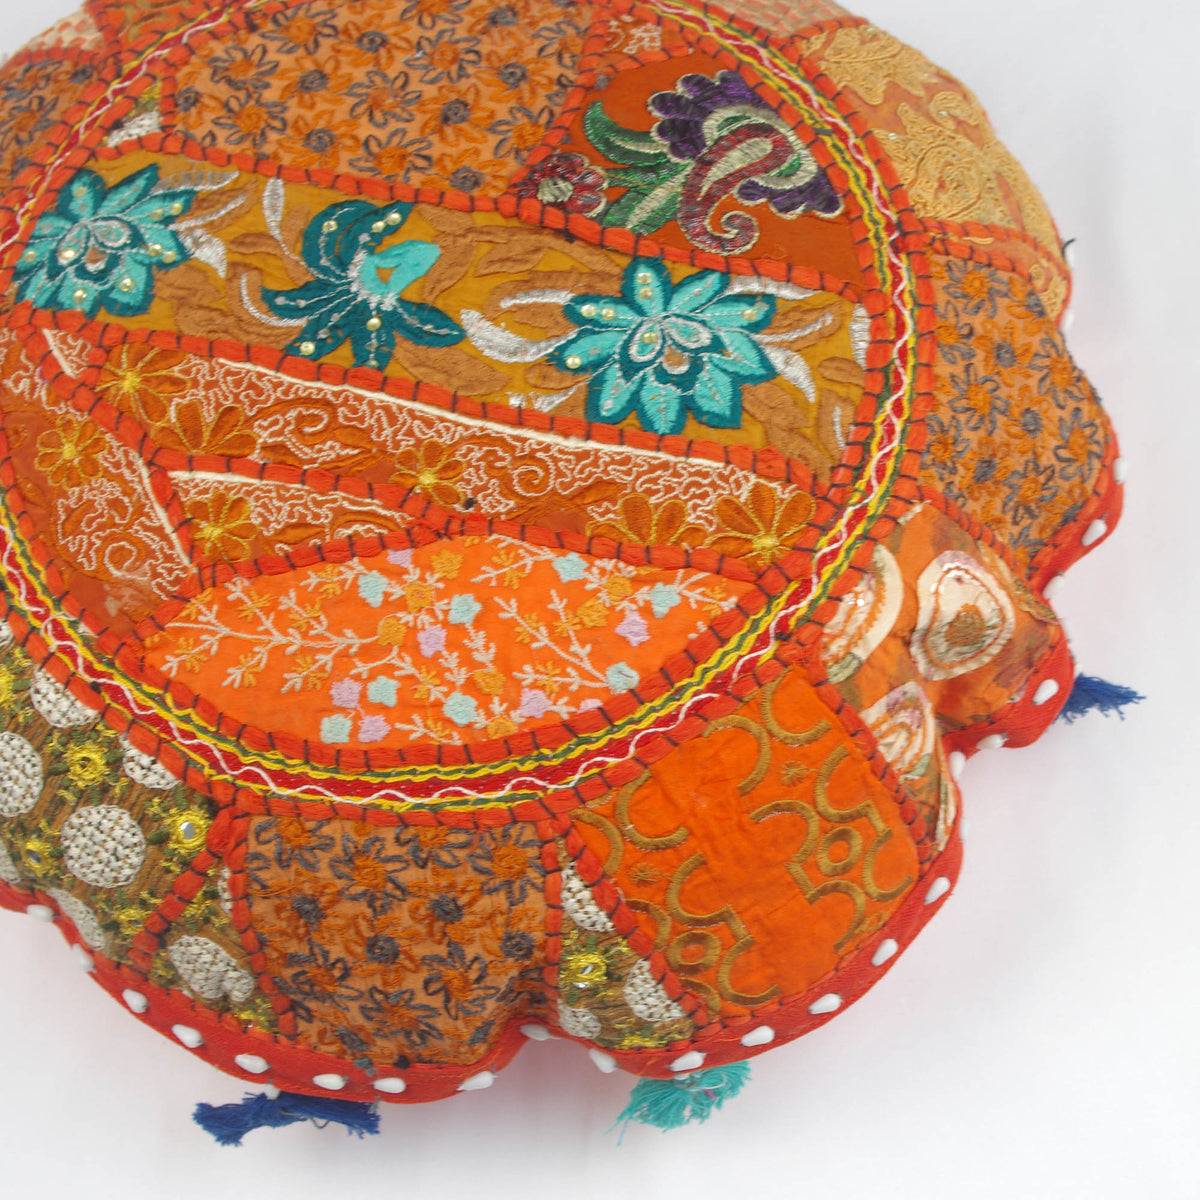 Orange With Teal Flowers Round Floor Embroidered Patchwork Pouf Ottoman Indian Vintage Cushion Cover 18"